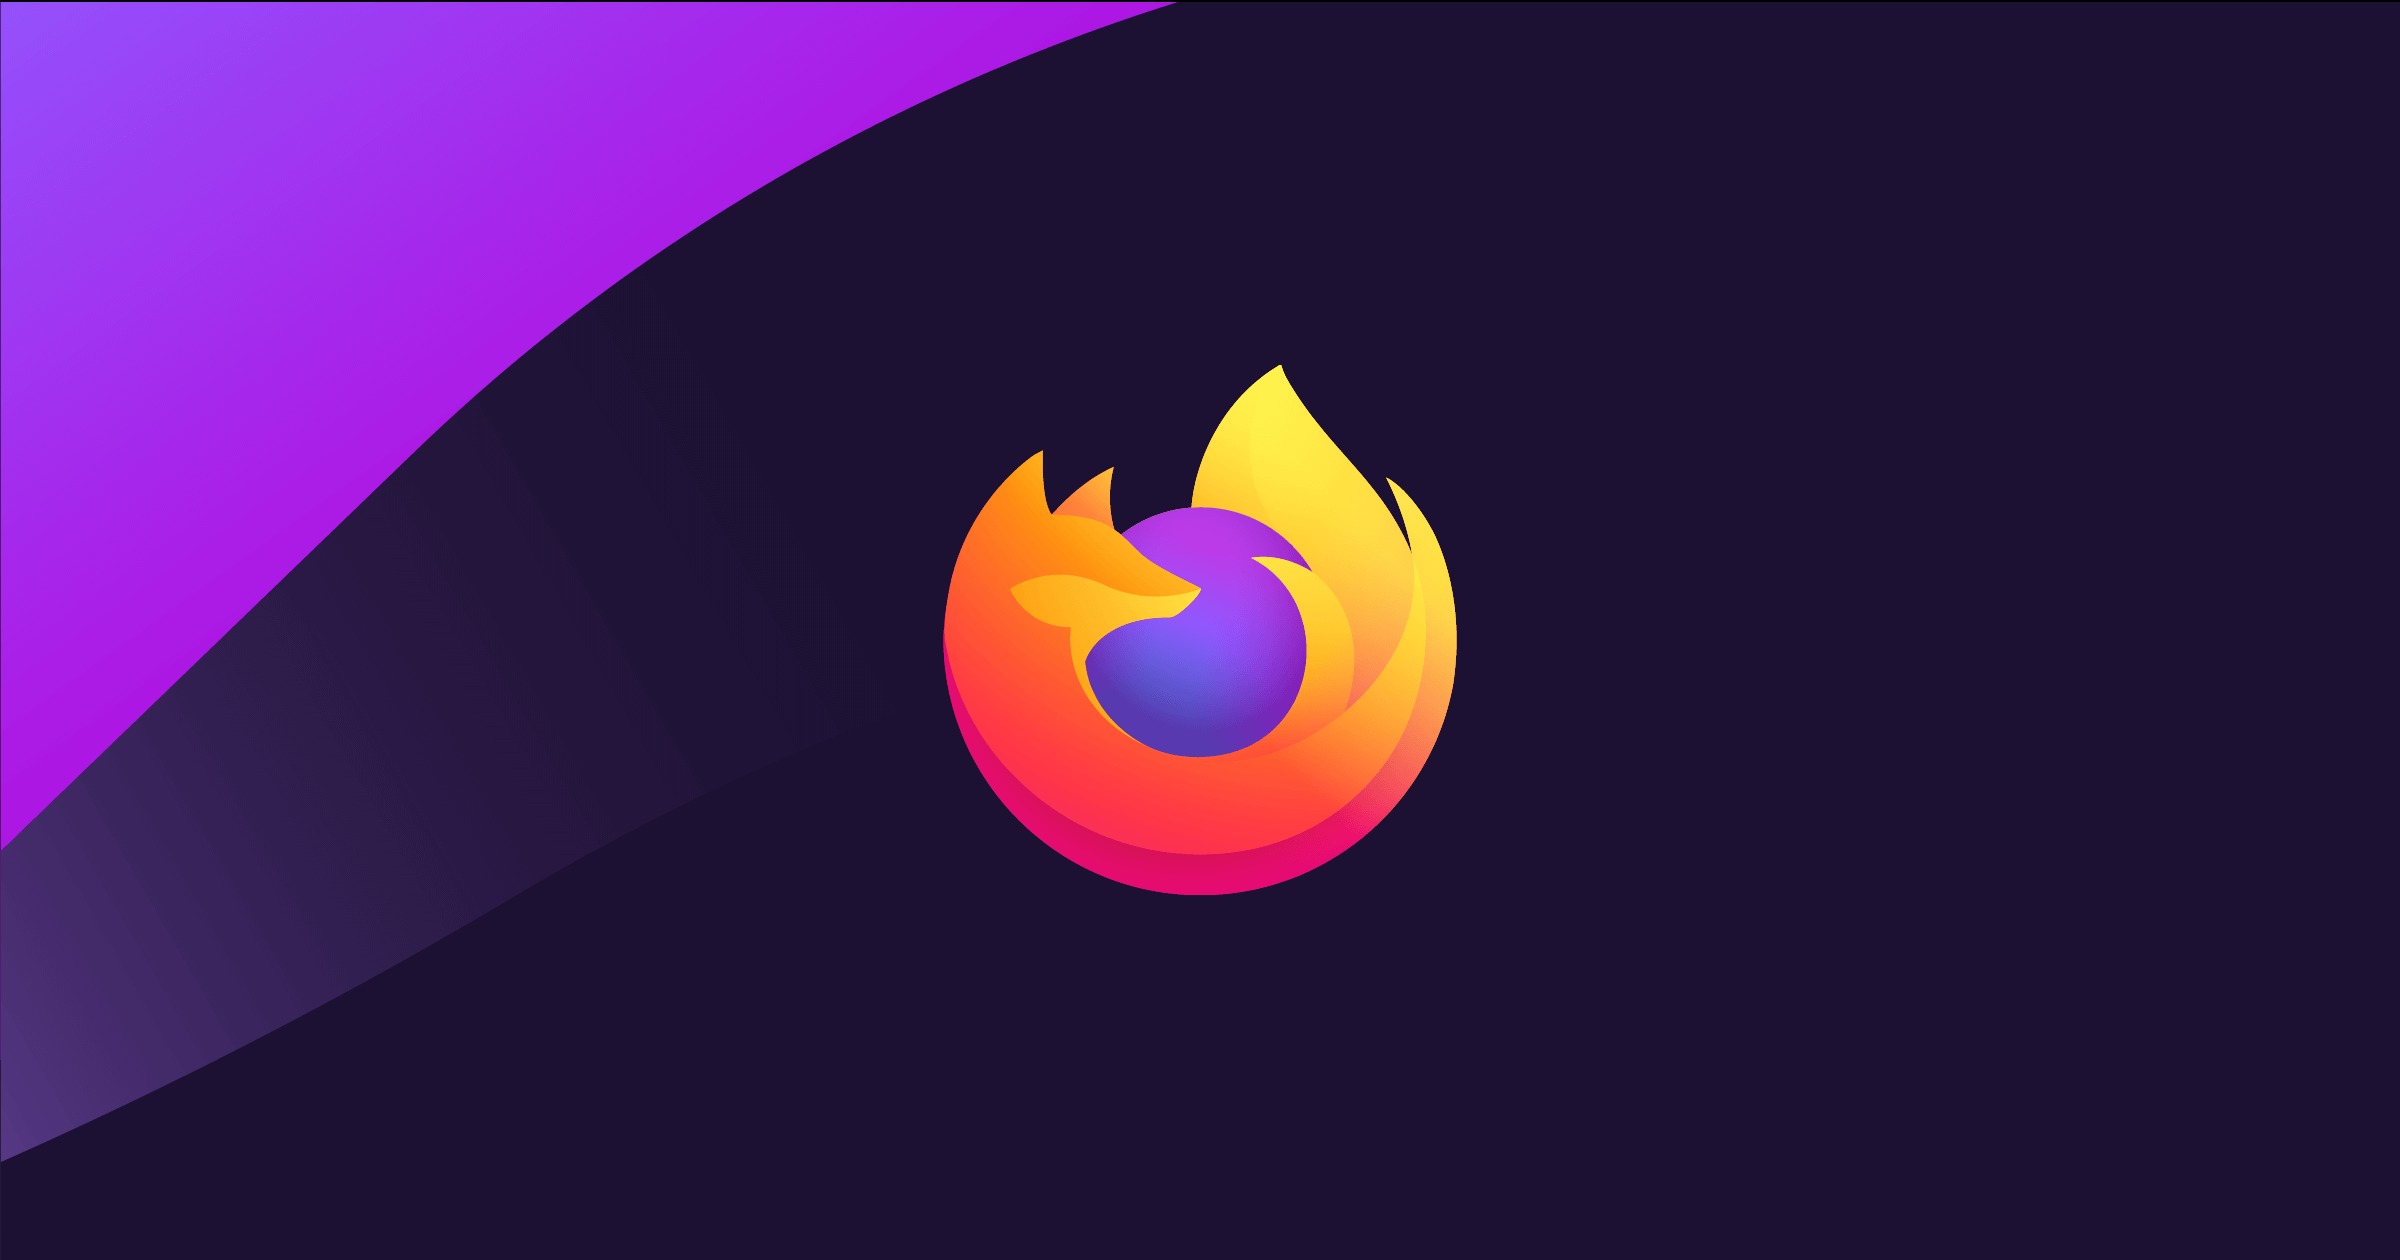 Firefox 95 now available for download